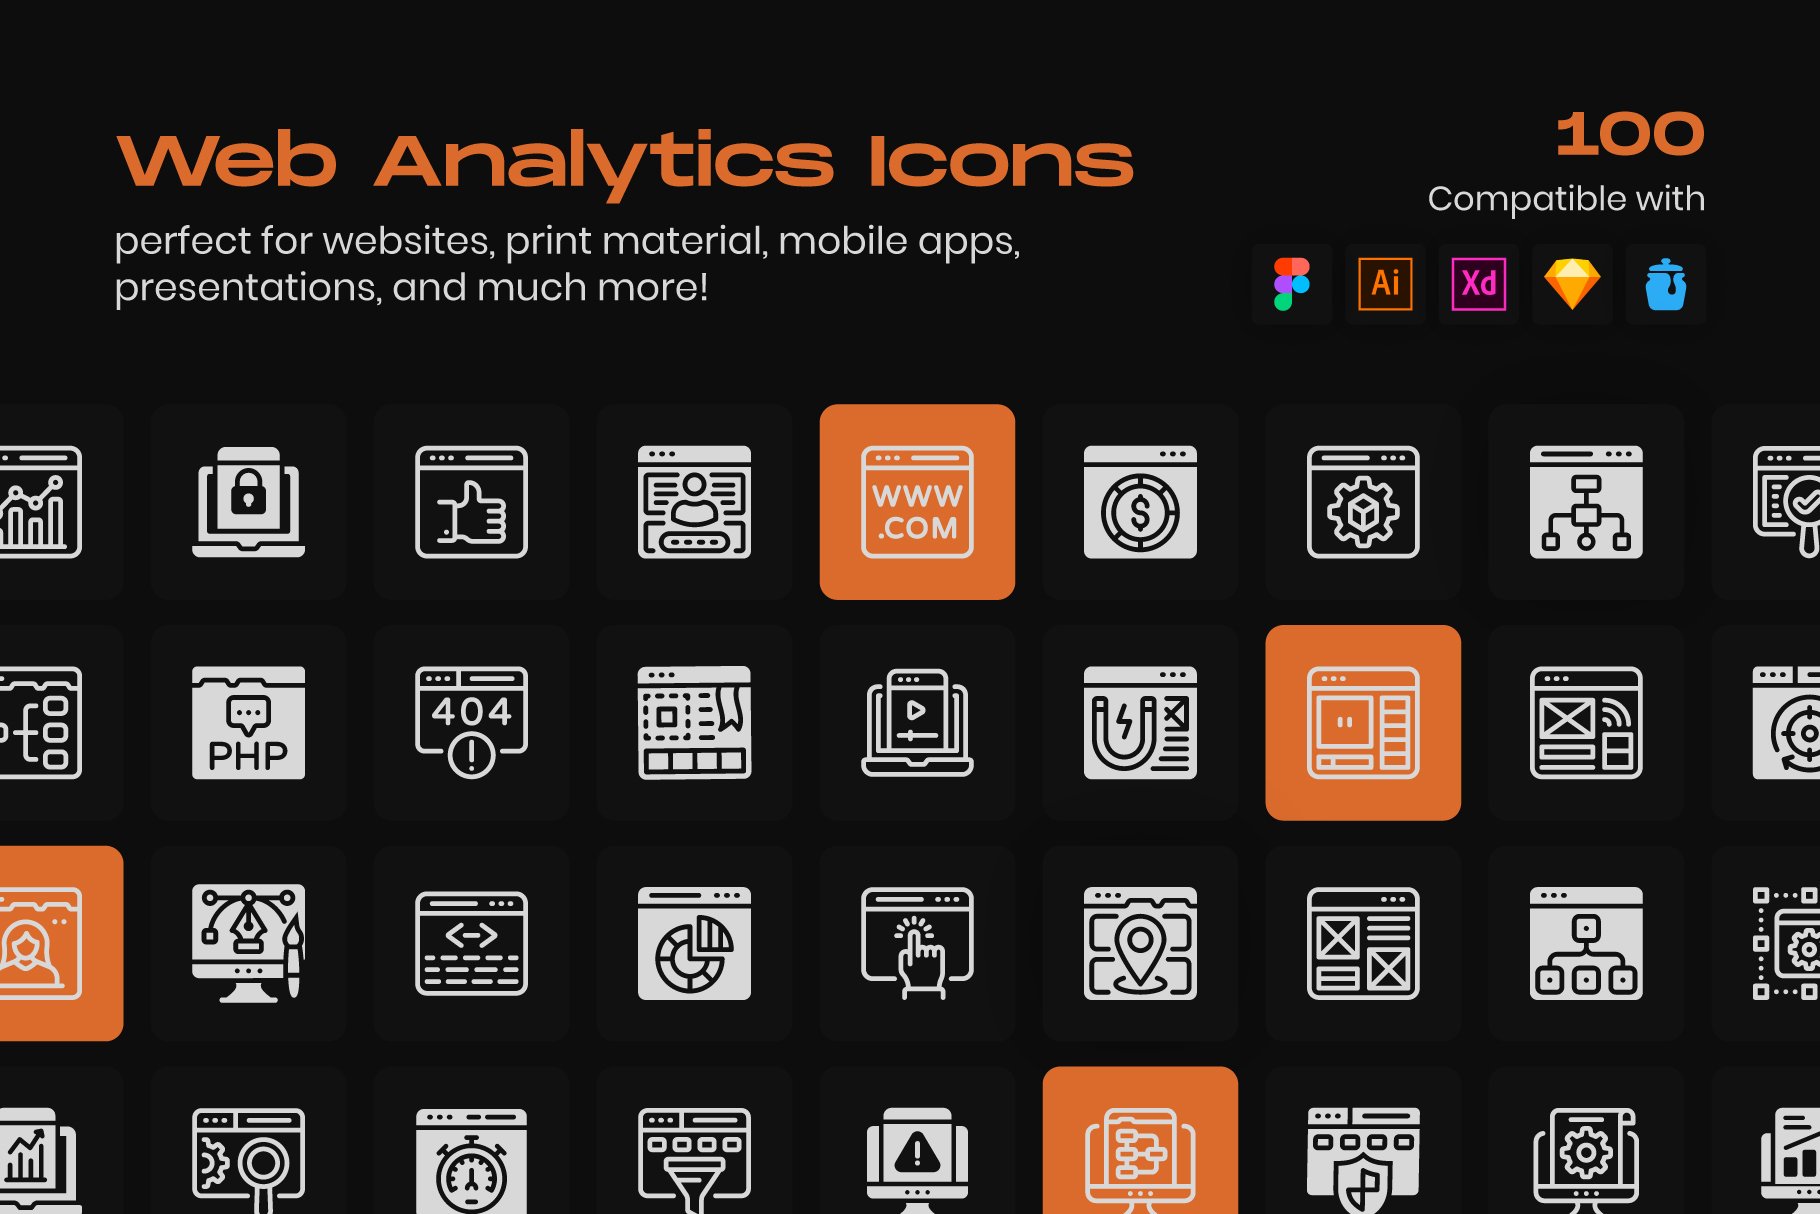 Web Development Linear Icons Pack cover image.